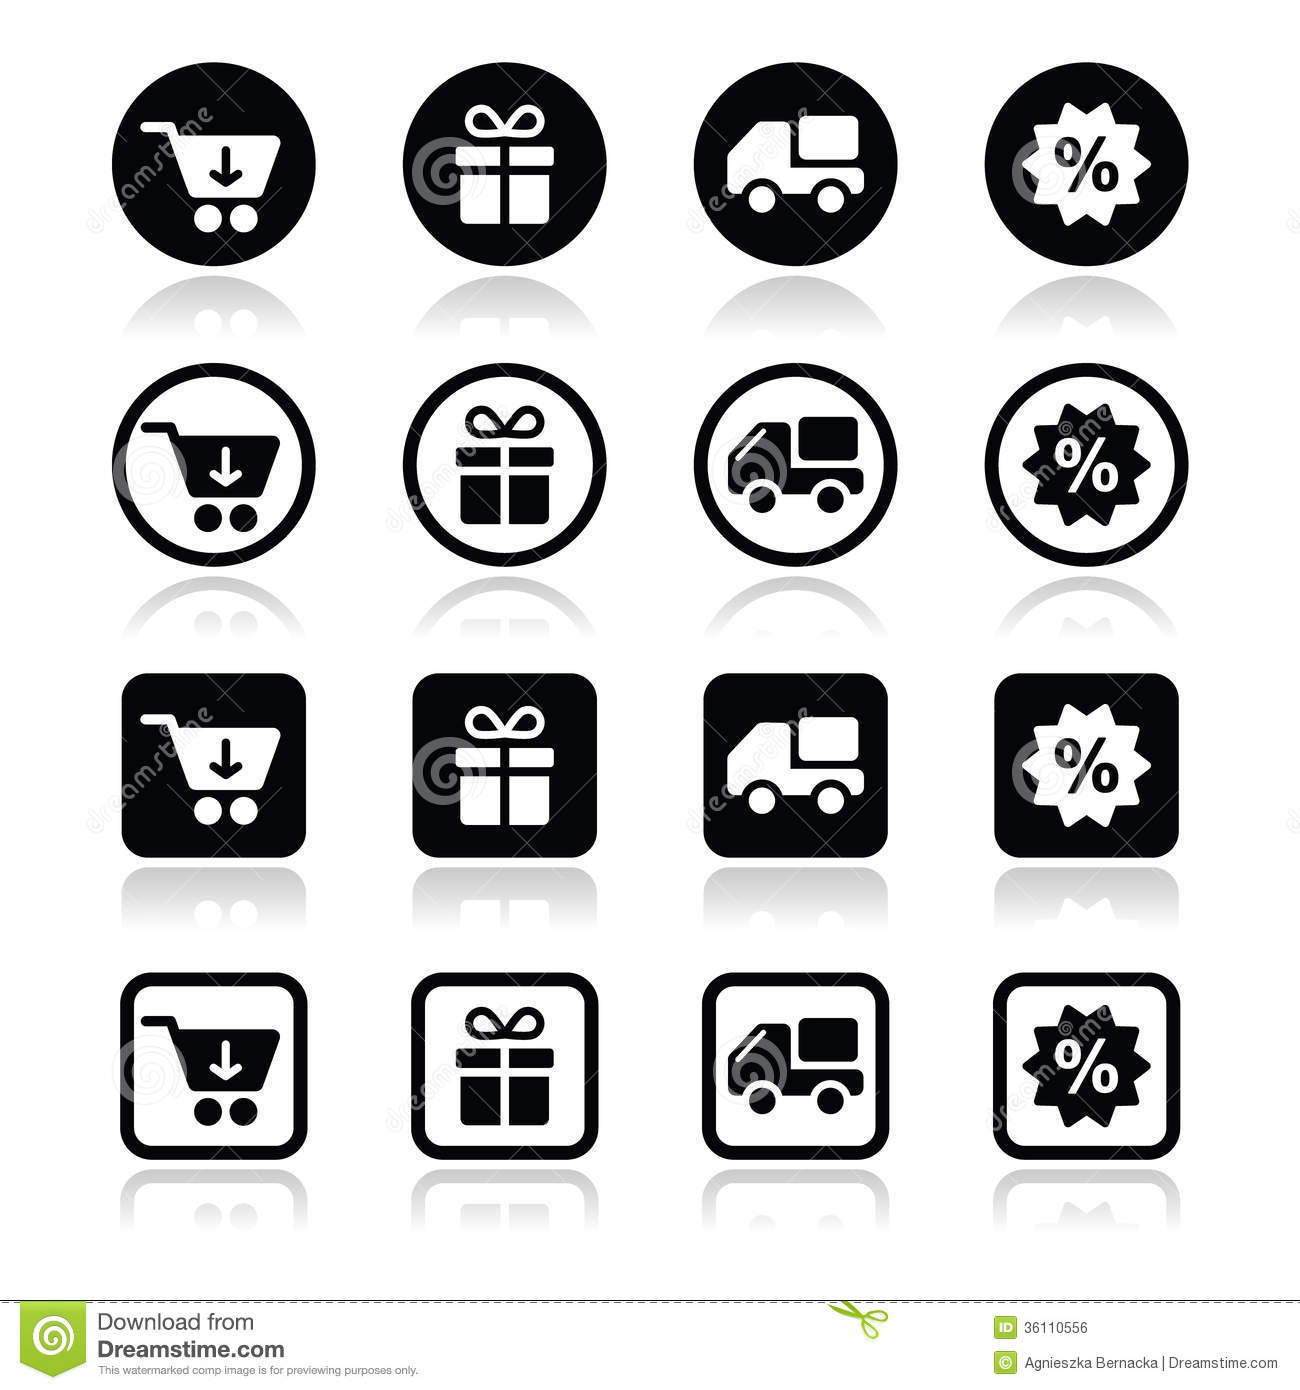 Black and White Shopping Cart Icon